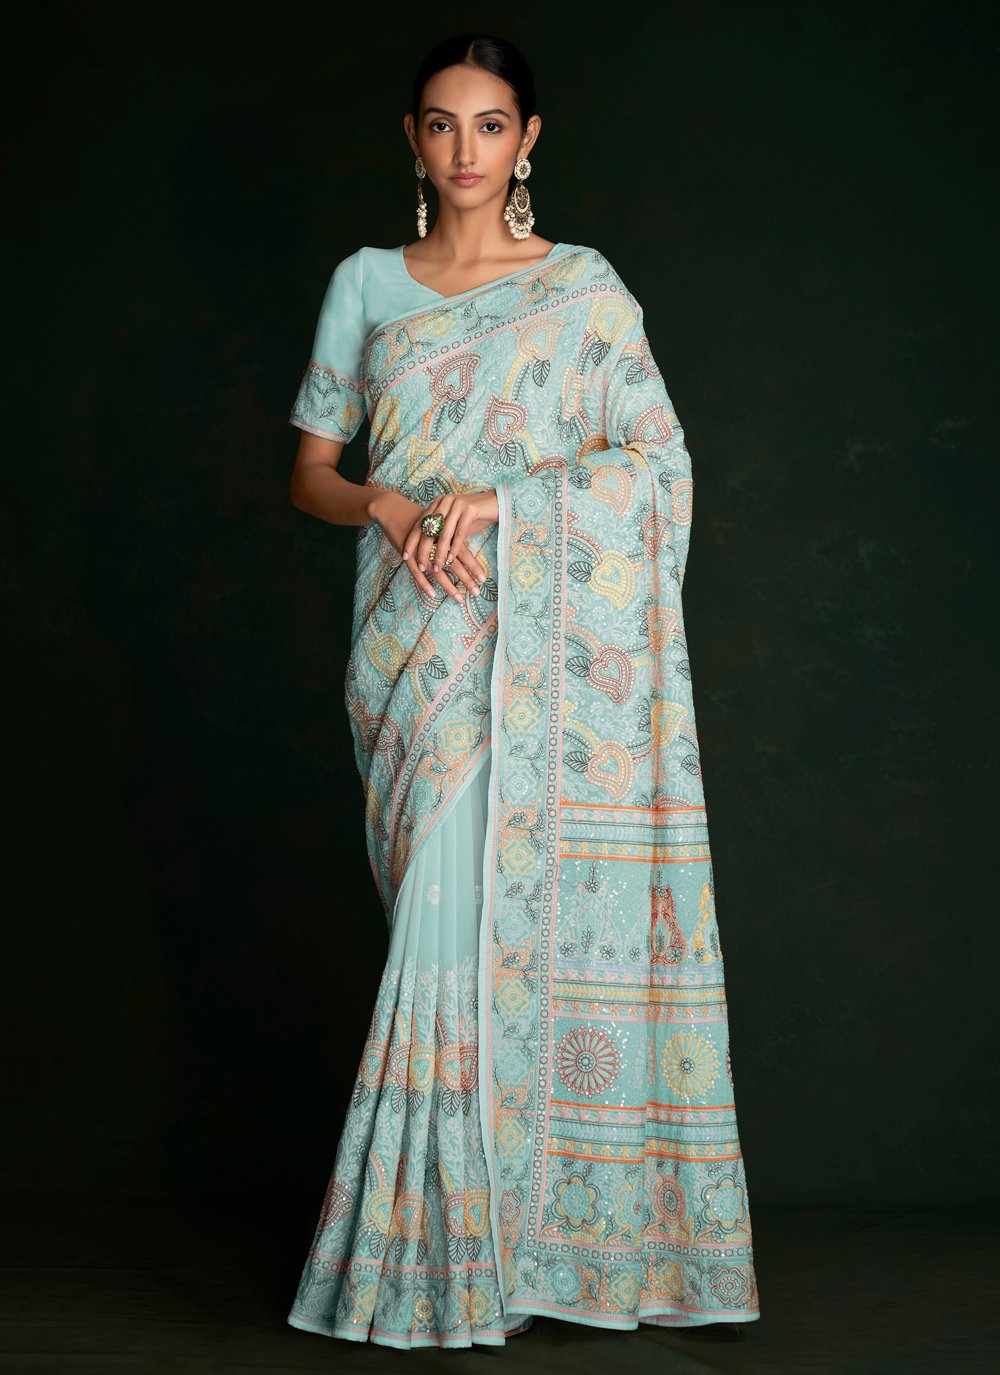 Contemporary Style Saree For Party